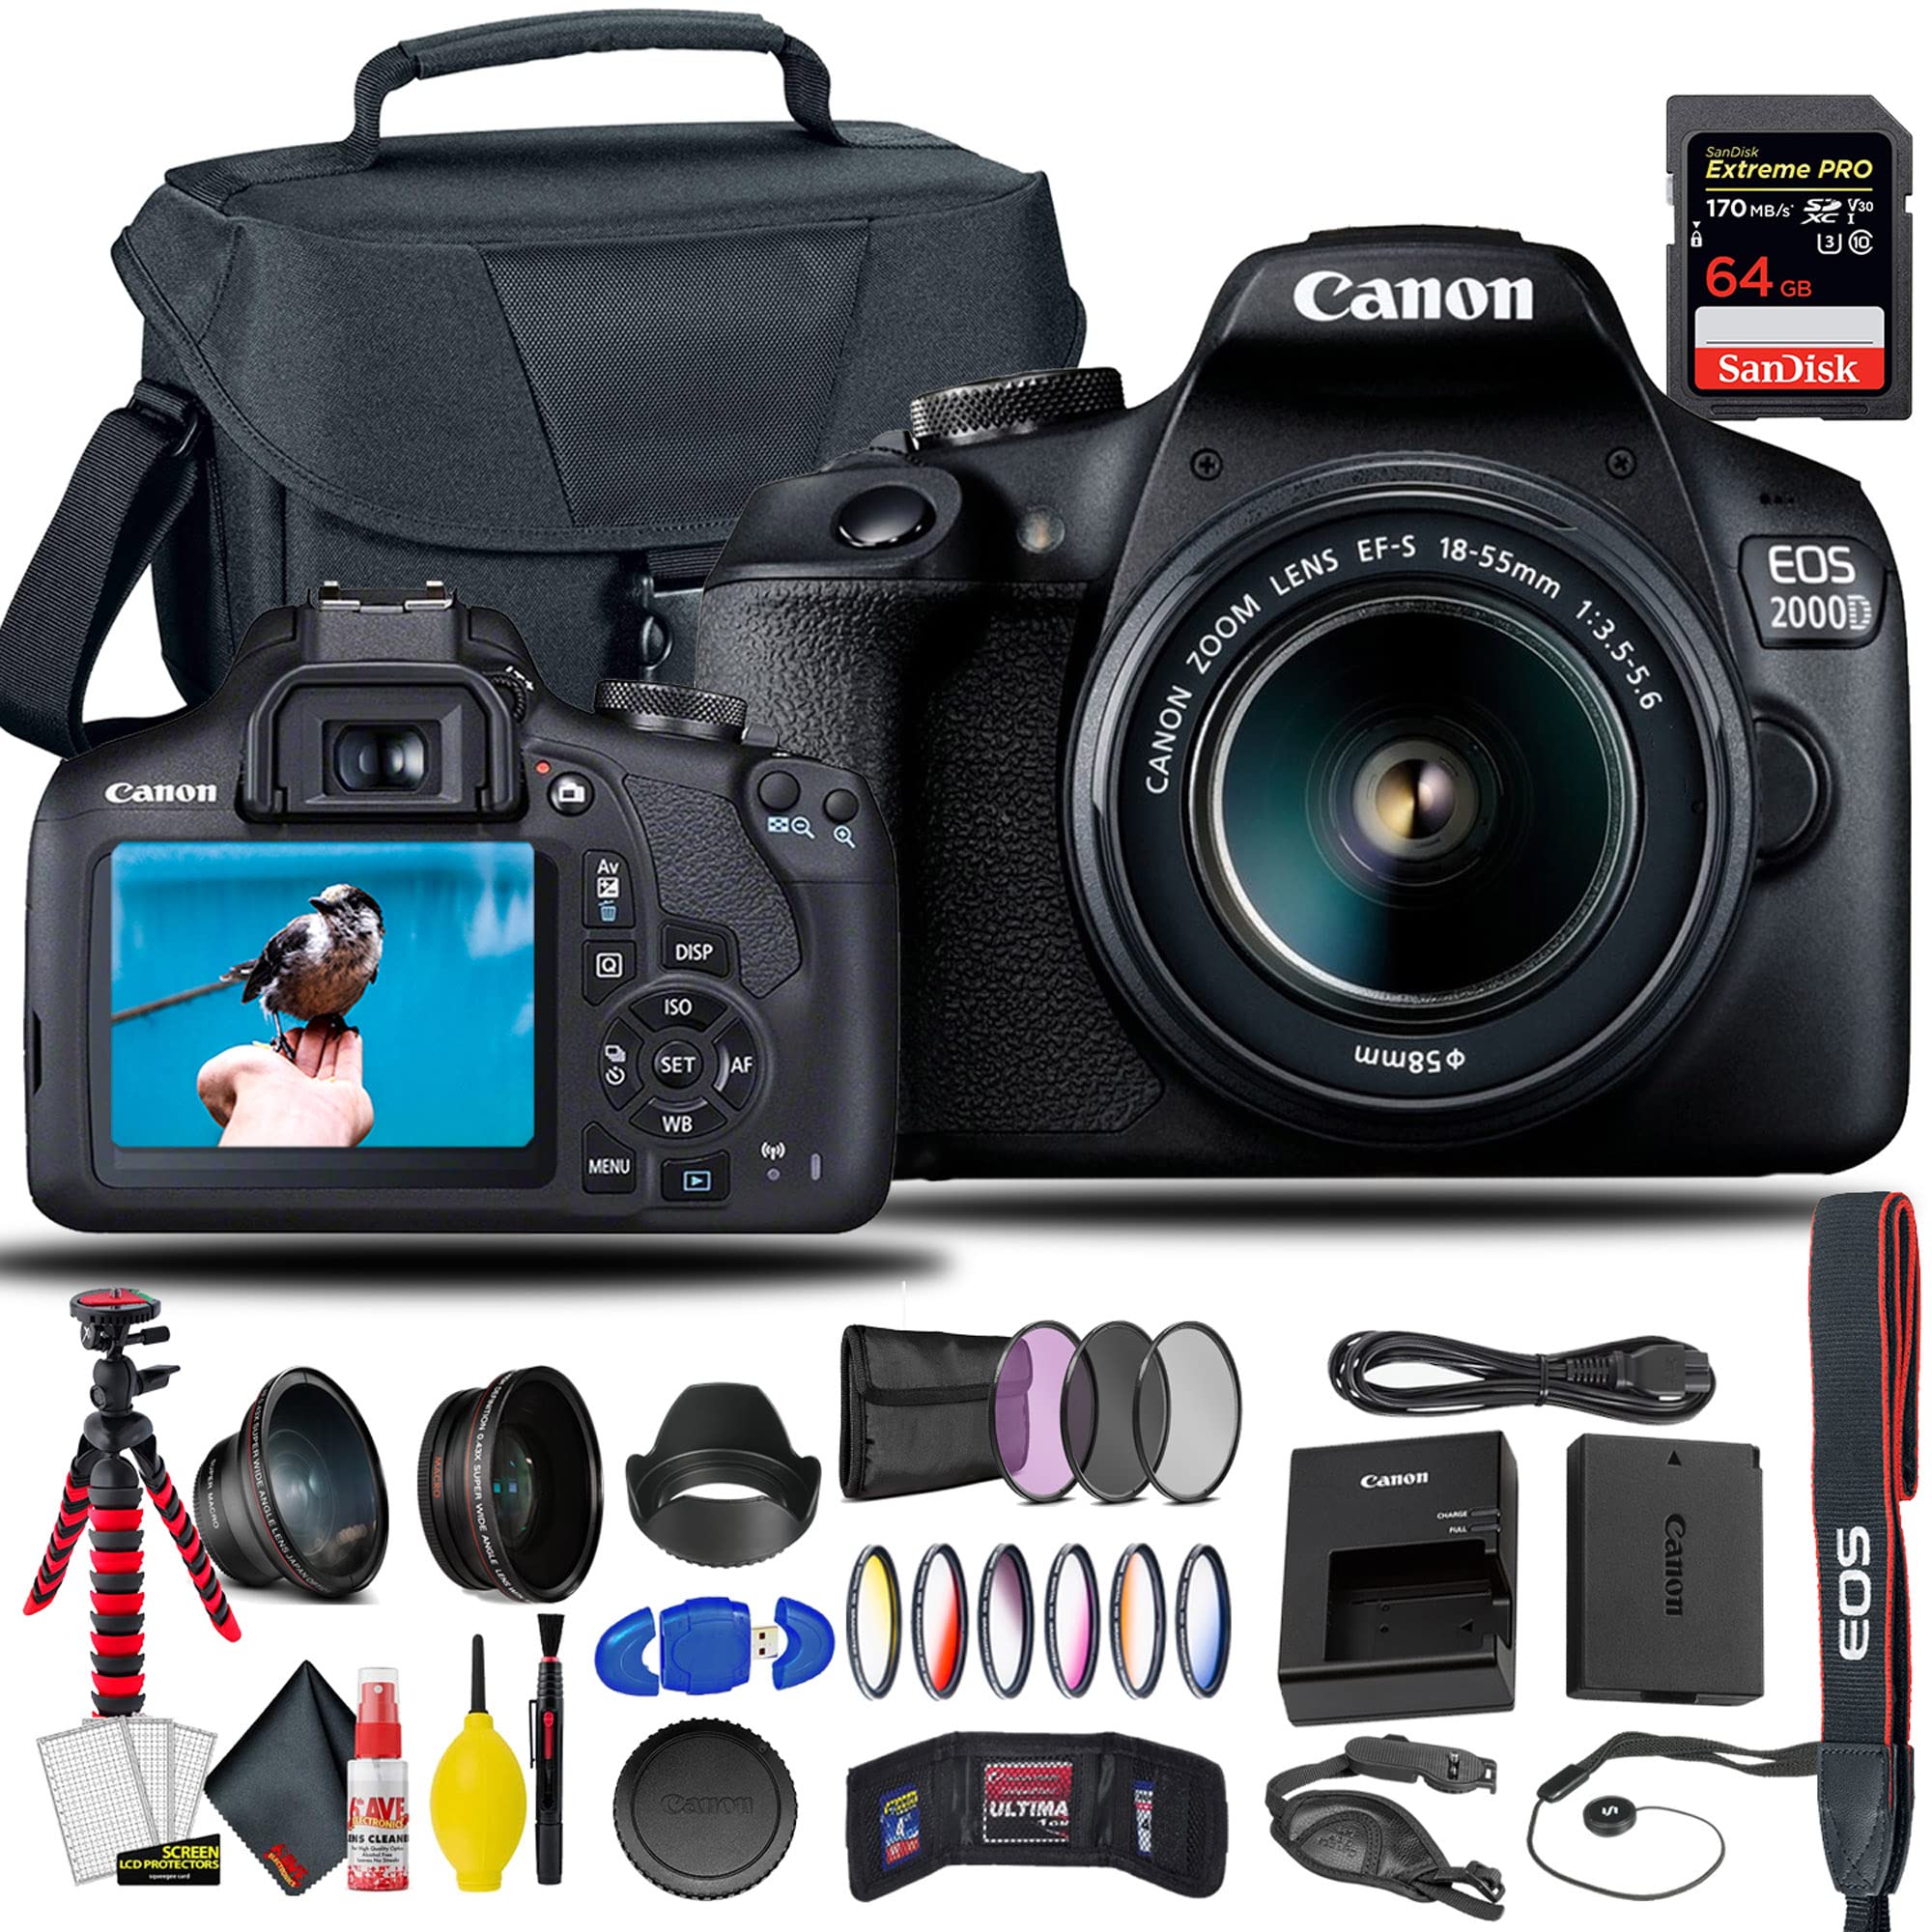 Canon EOS 2000D / Rebel T7 DSLR Camera with 18-55mm Lens + Sandisk Extreme Pro 64GB Card + Creative Filters + EOS Camera Bag + 6AVE Cleaning Set, More (International Model) (Renewed)